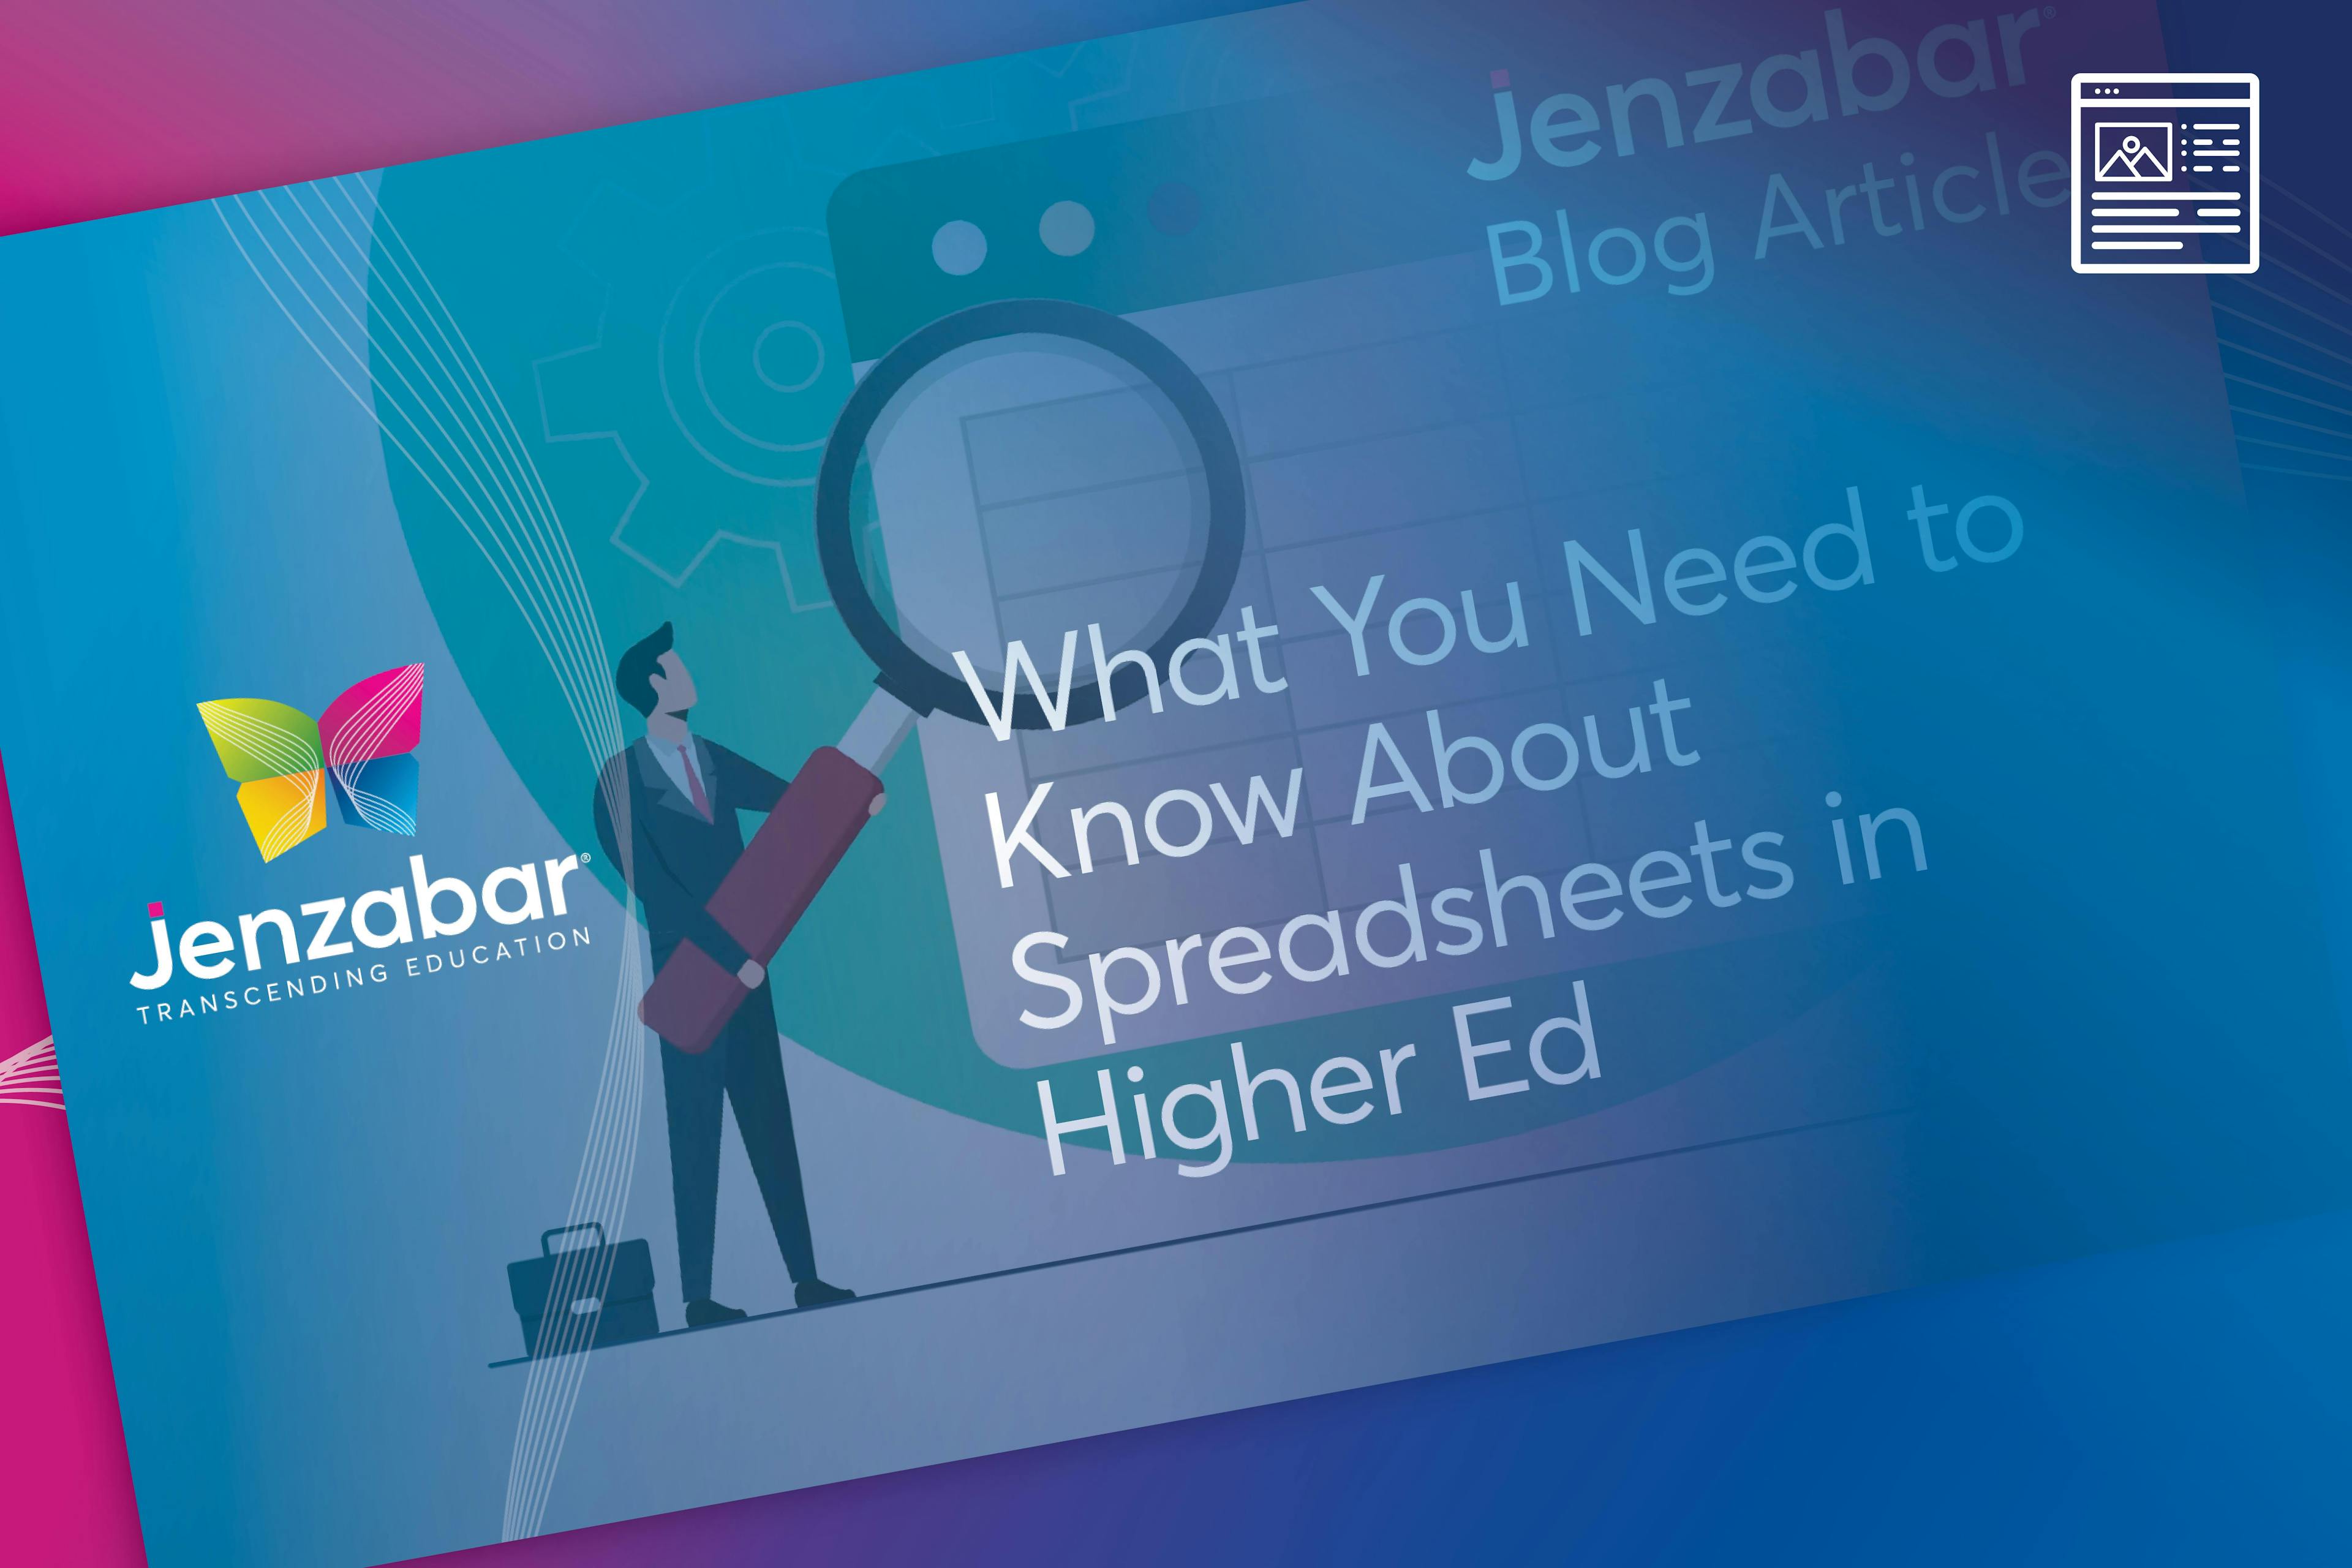 Blog: What You Need to Know About Spreadsheets in Higher Ed